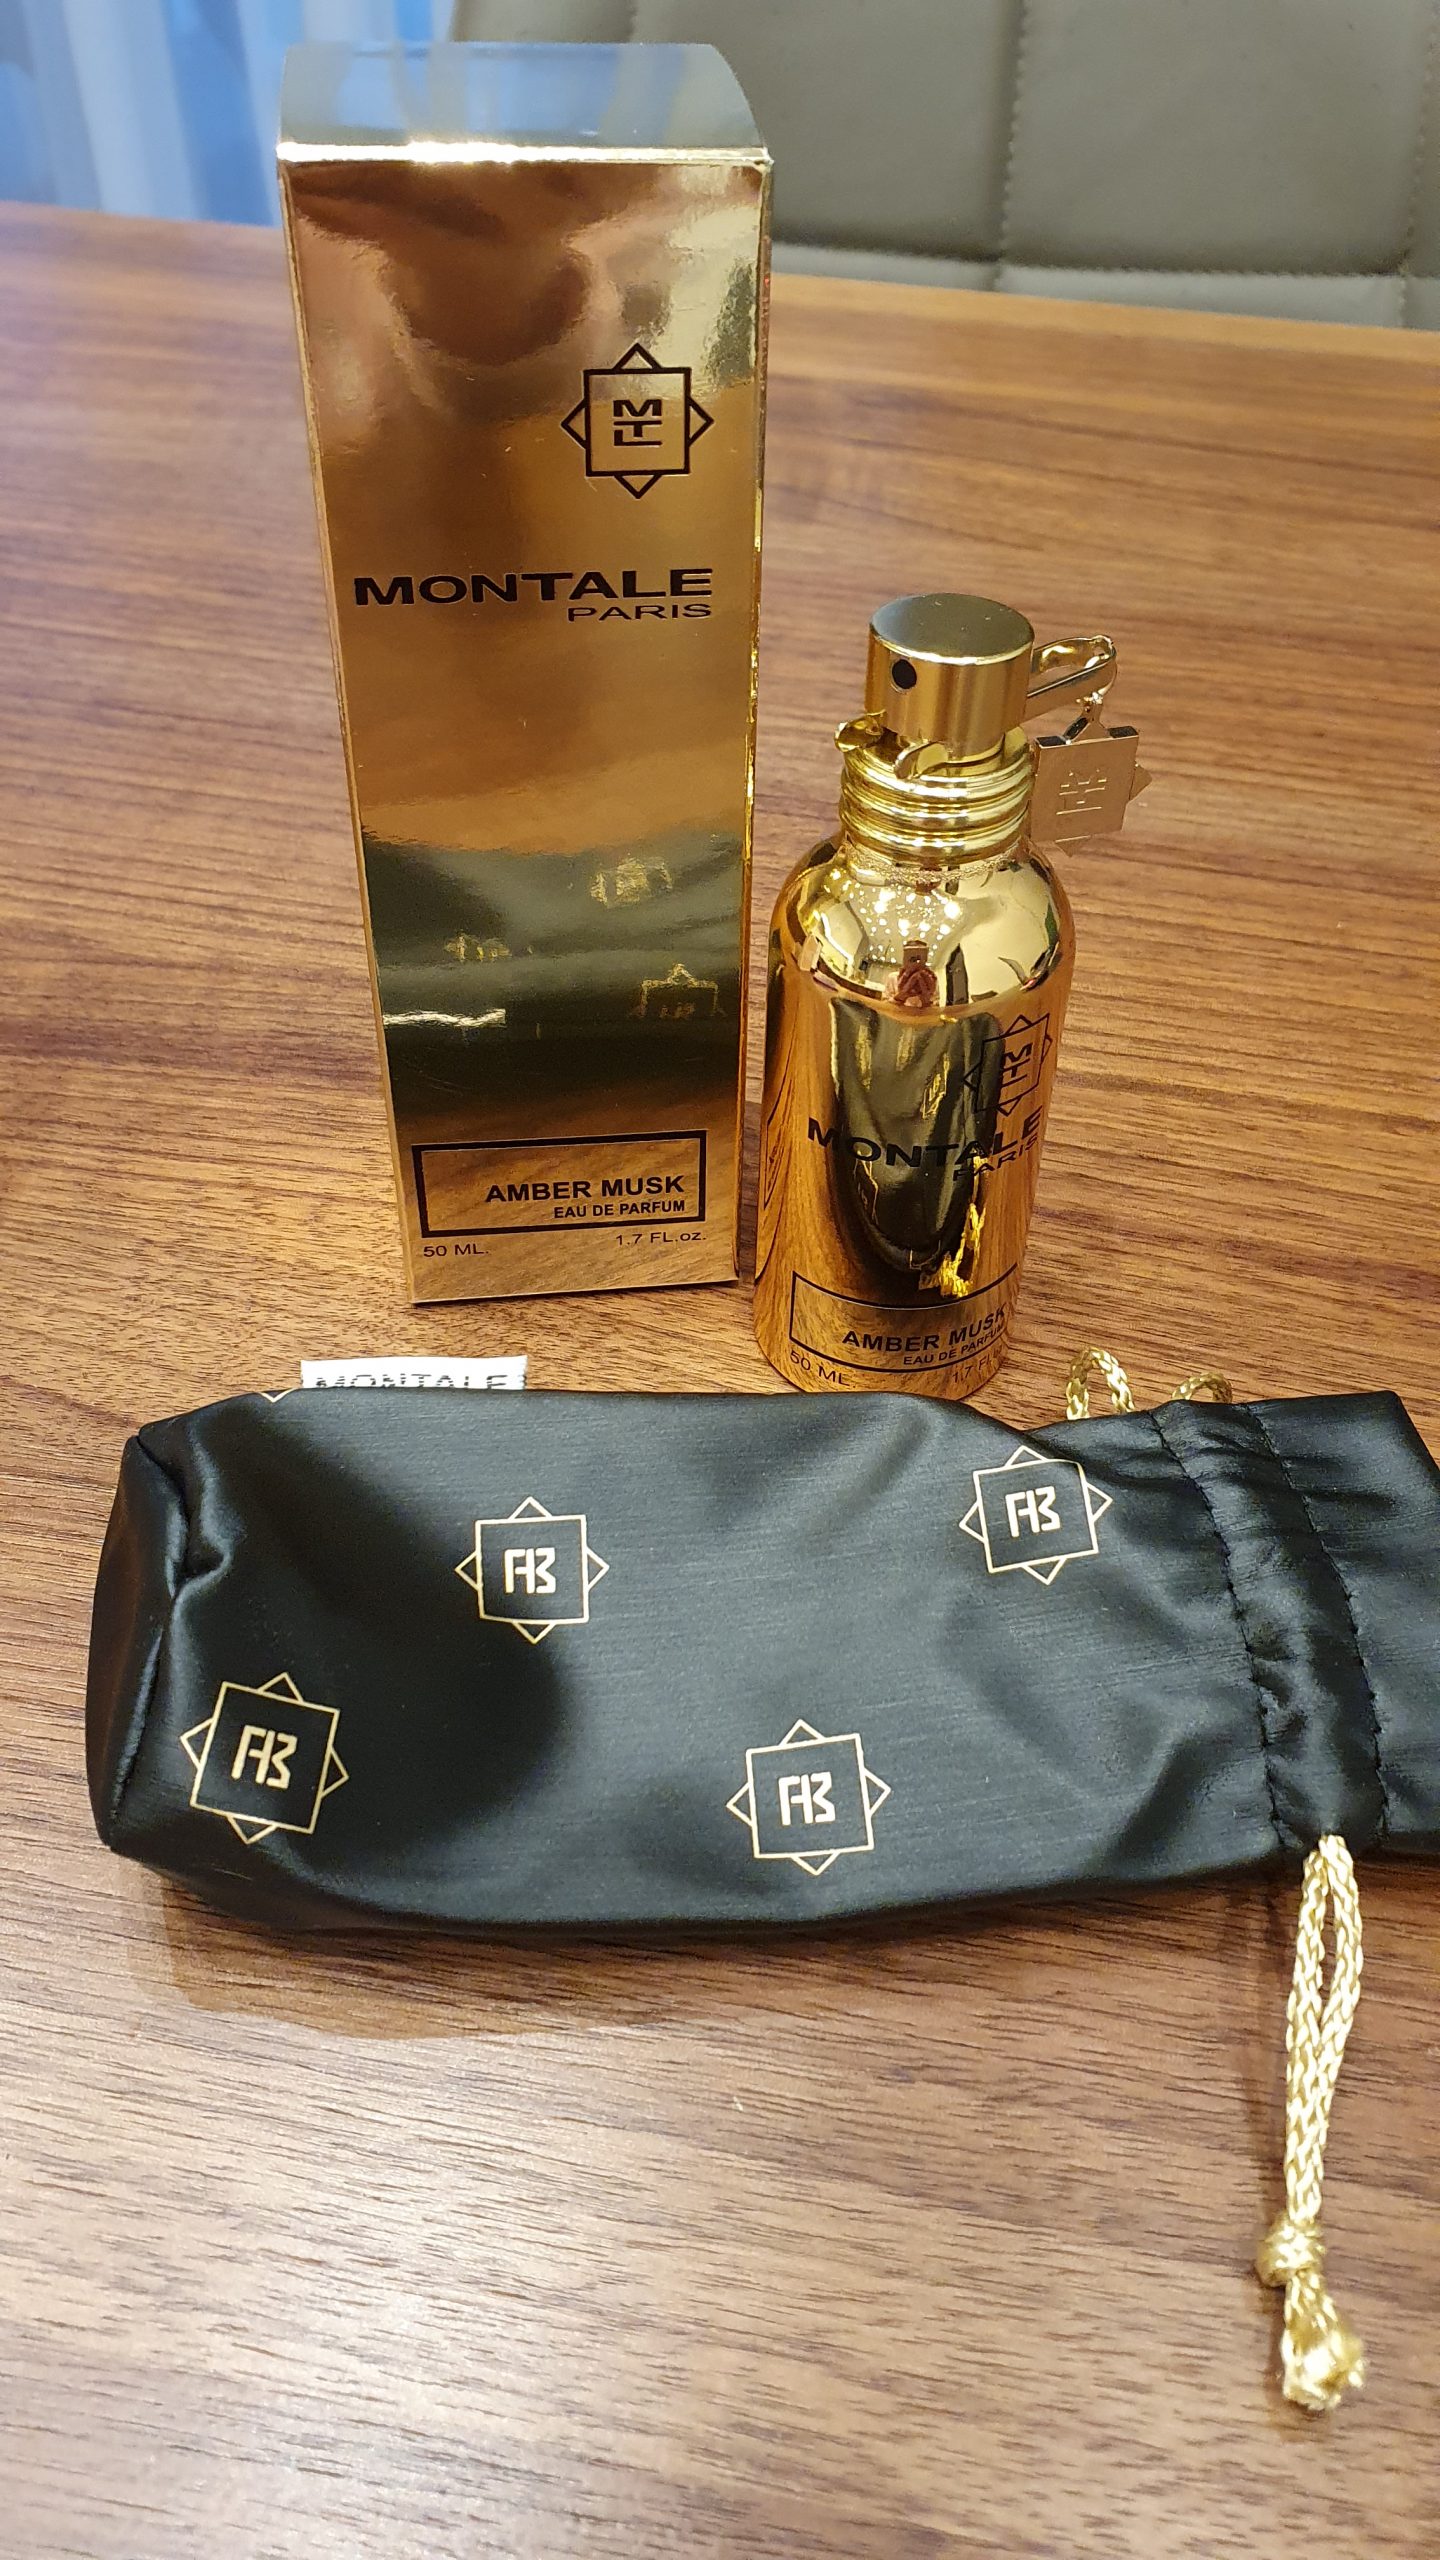 Montale amber musk. Духи Montale Amber Musk. Montale Amber Musk 50ml. Montale Amber Musk Reni. Montale Amber Musk реклама.